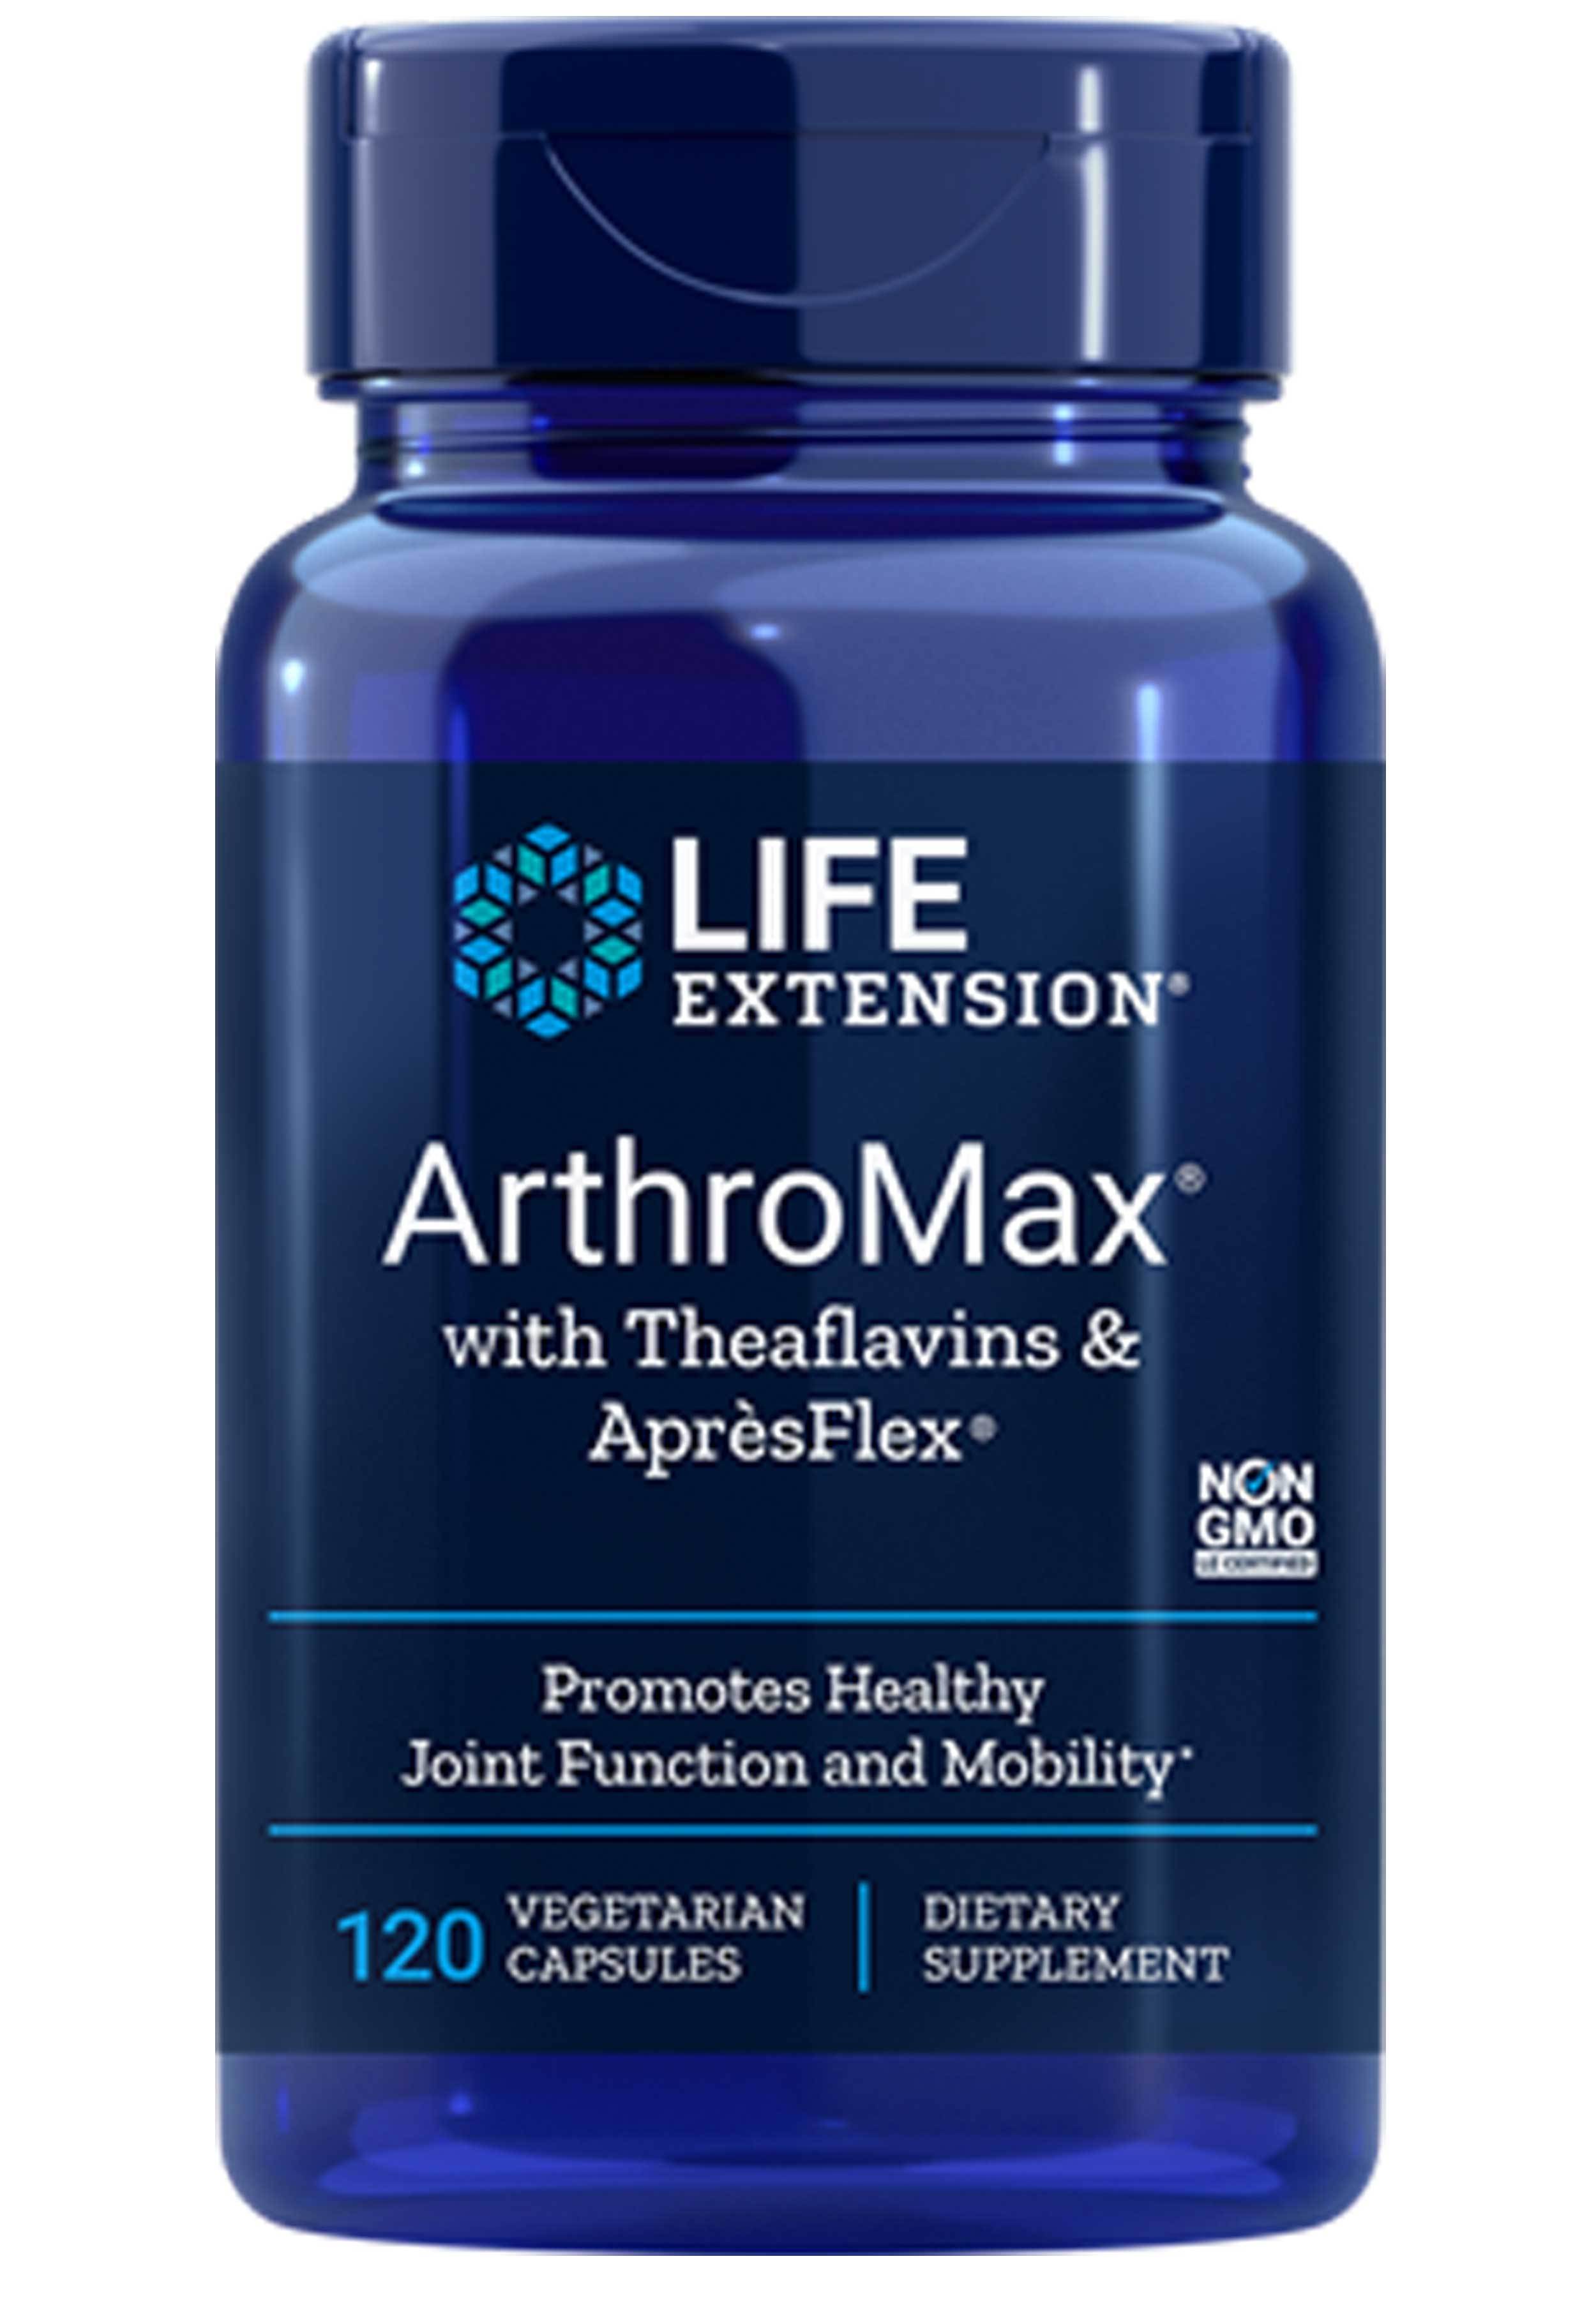 Life Extension ArthroMax with Theaflavins and ApresFlex